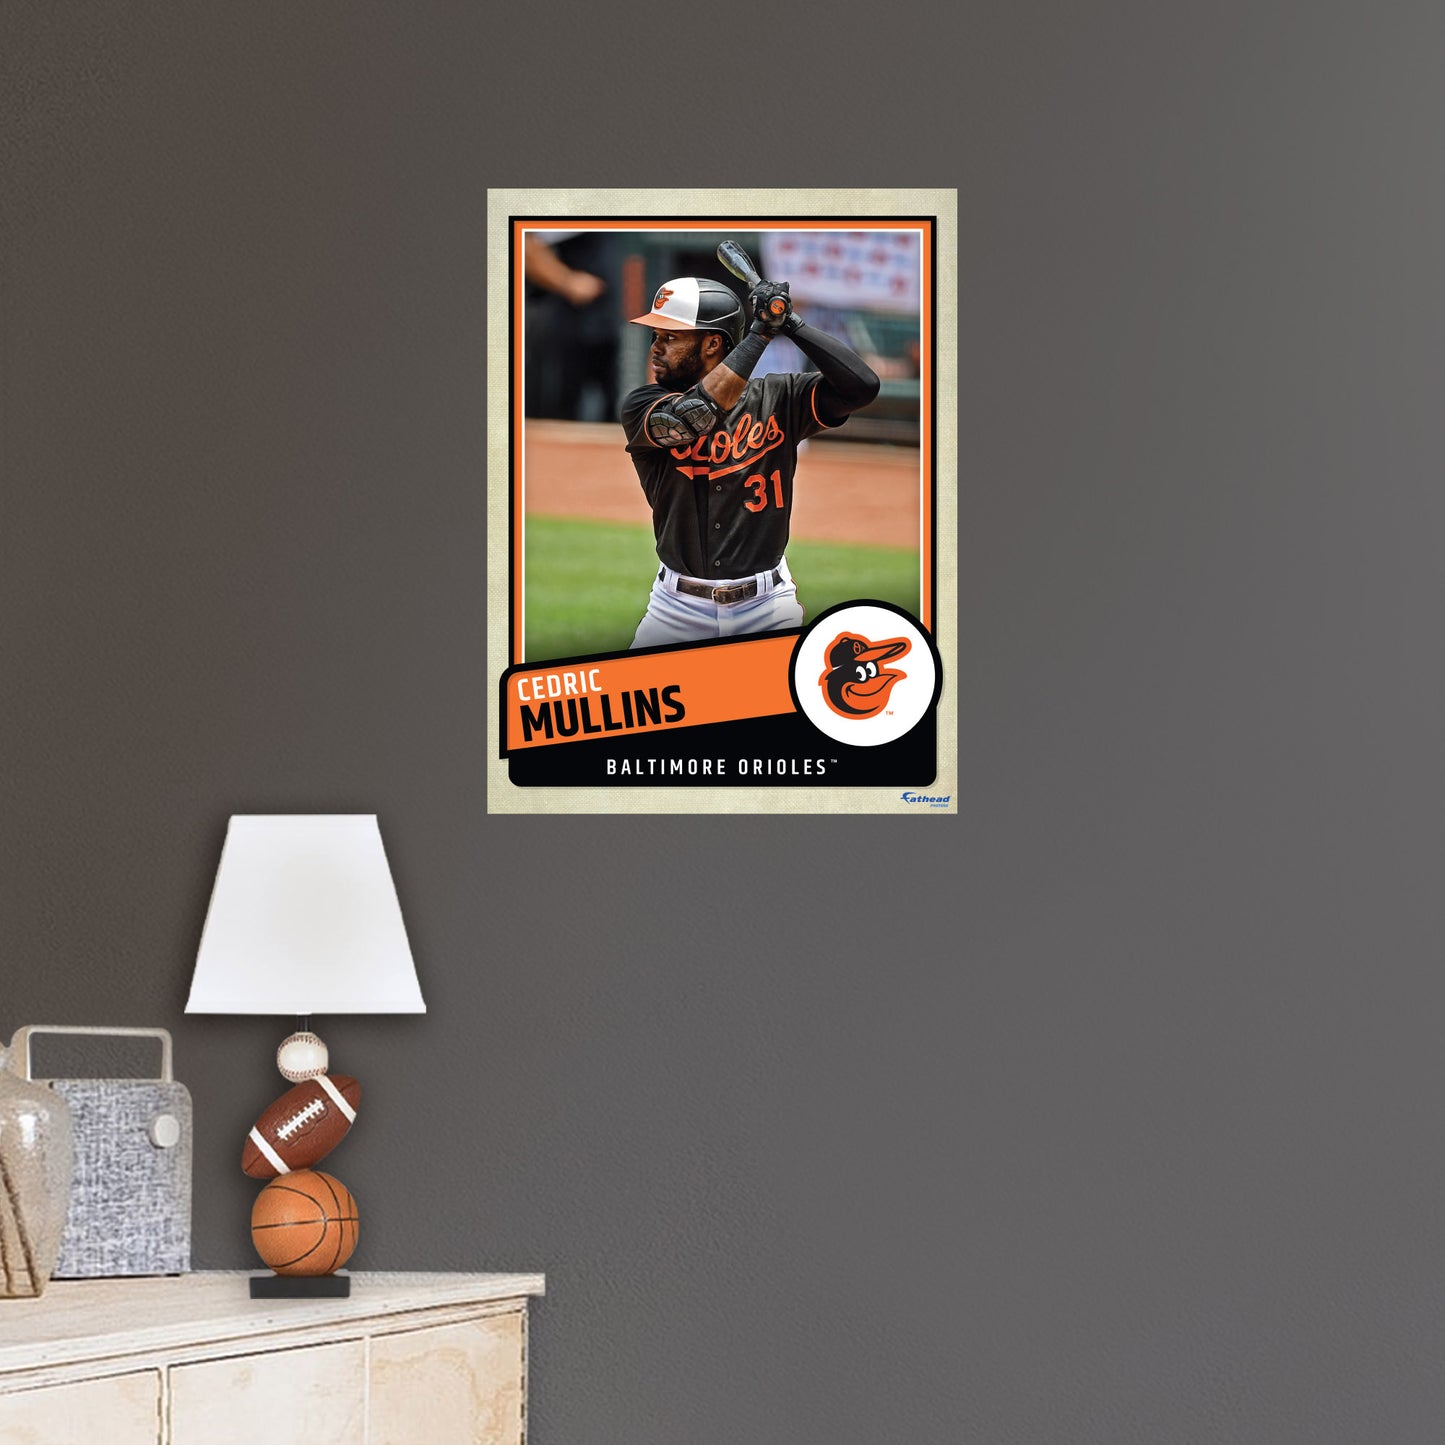 Baltimore Orioles: Cedric Mullins  Poster        - Officially Licensed MLB Removable     Adhesive Decal